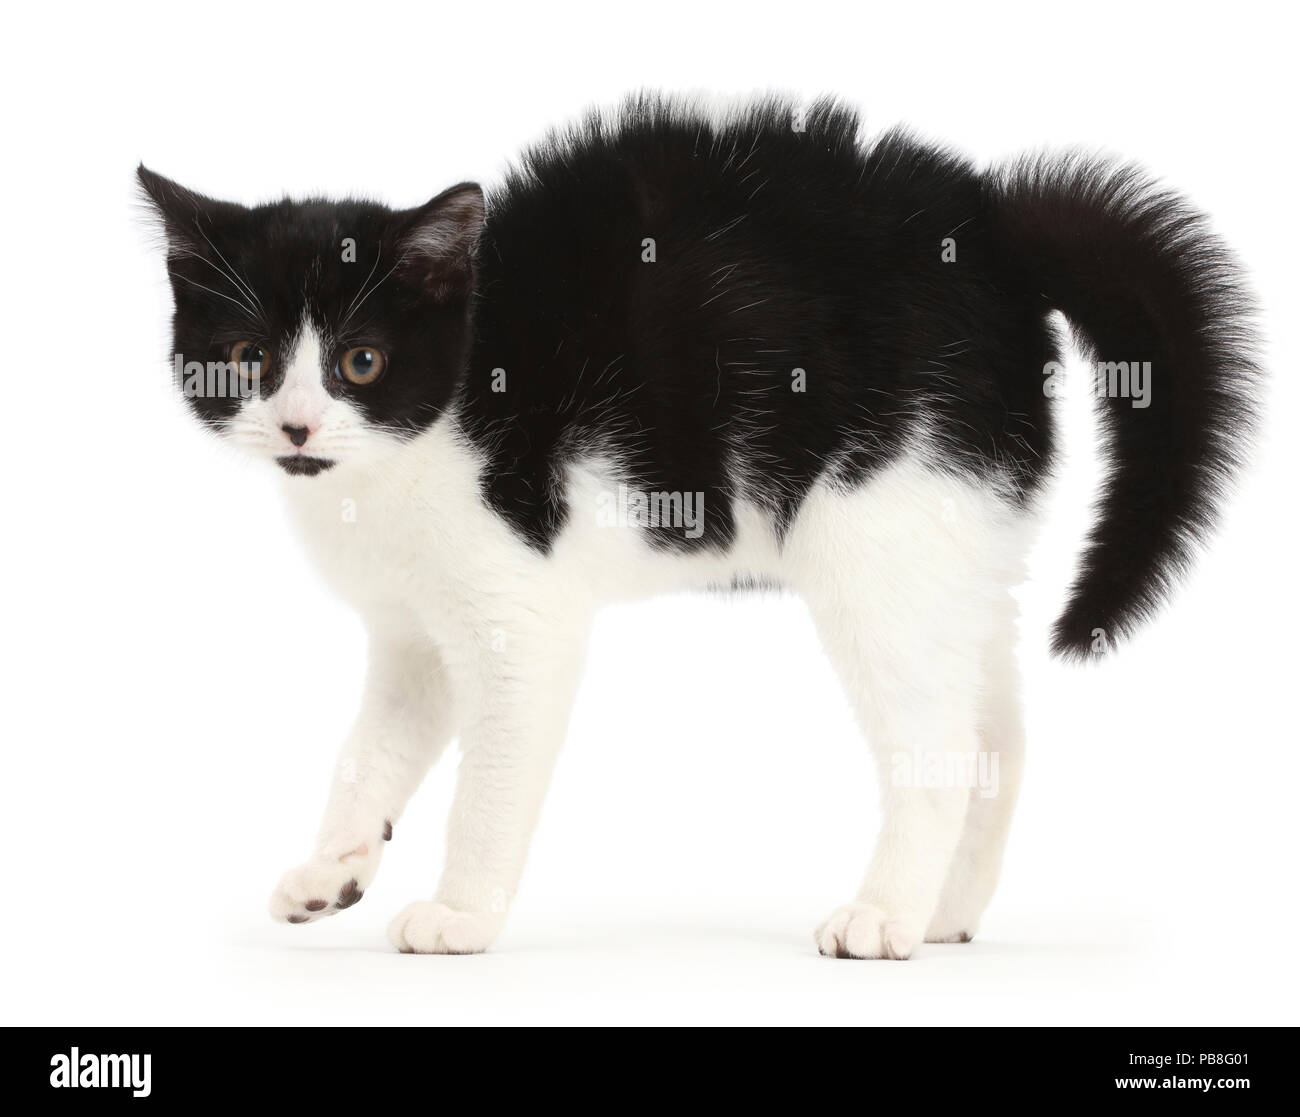 Black-and-white kitten, Loona, age 11 weeks, arching back. Stock Photo